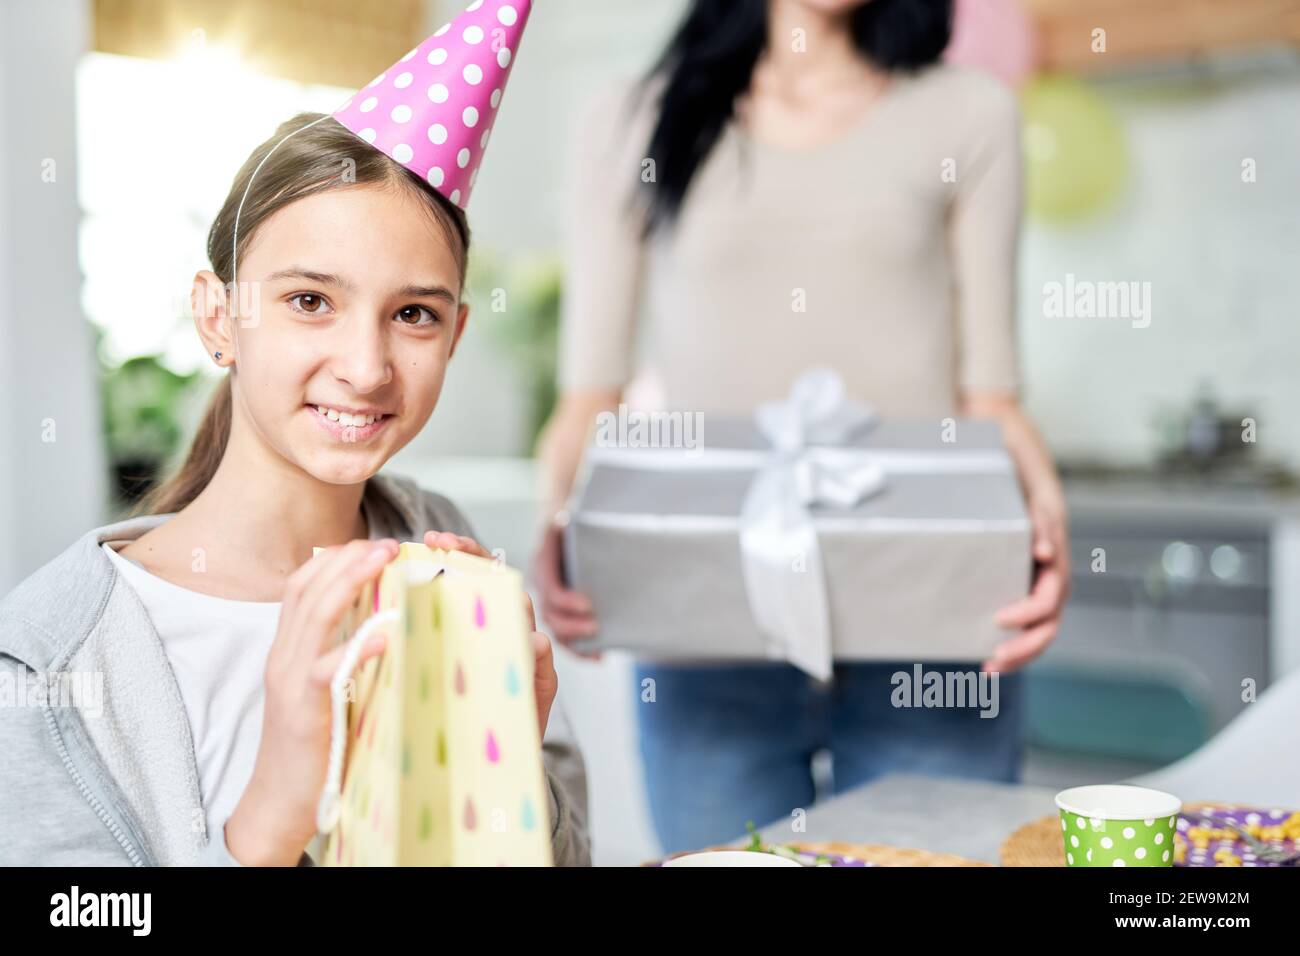 Pretty teenaged latin girl smiling at camera while holding gift bag, receiving presents, celebrating birthday with mother at home. Celebration, childhood concept. Selective focus Stock Photo